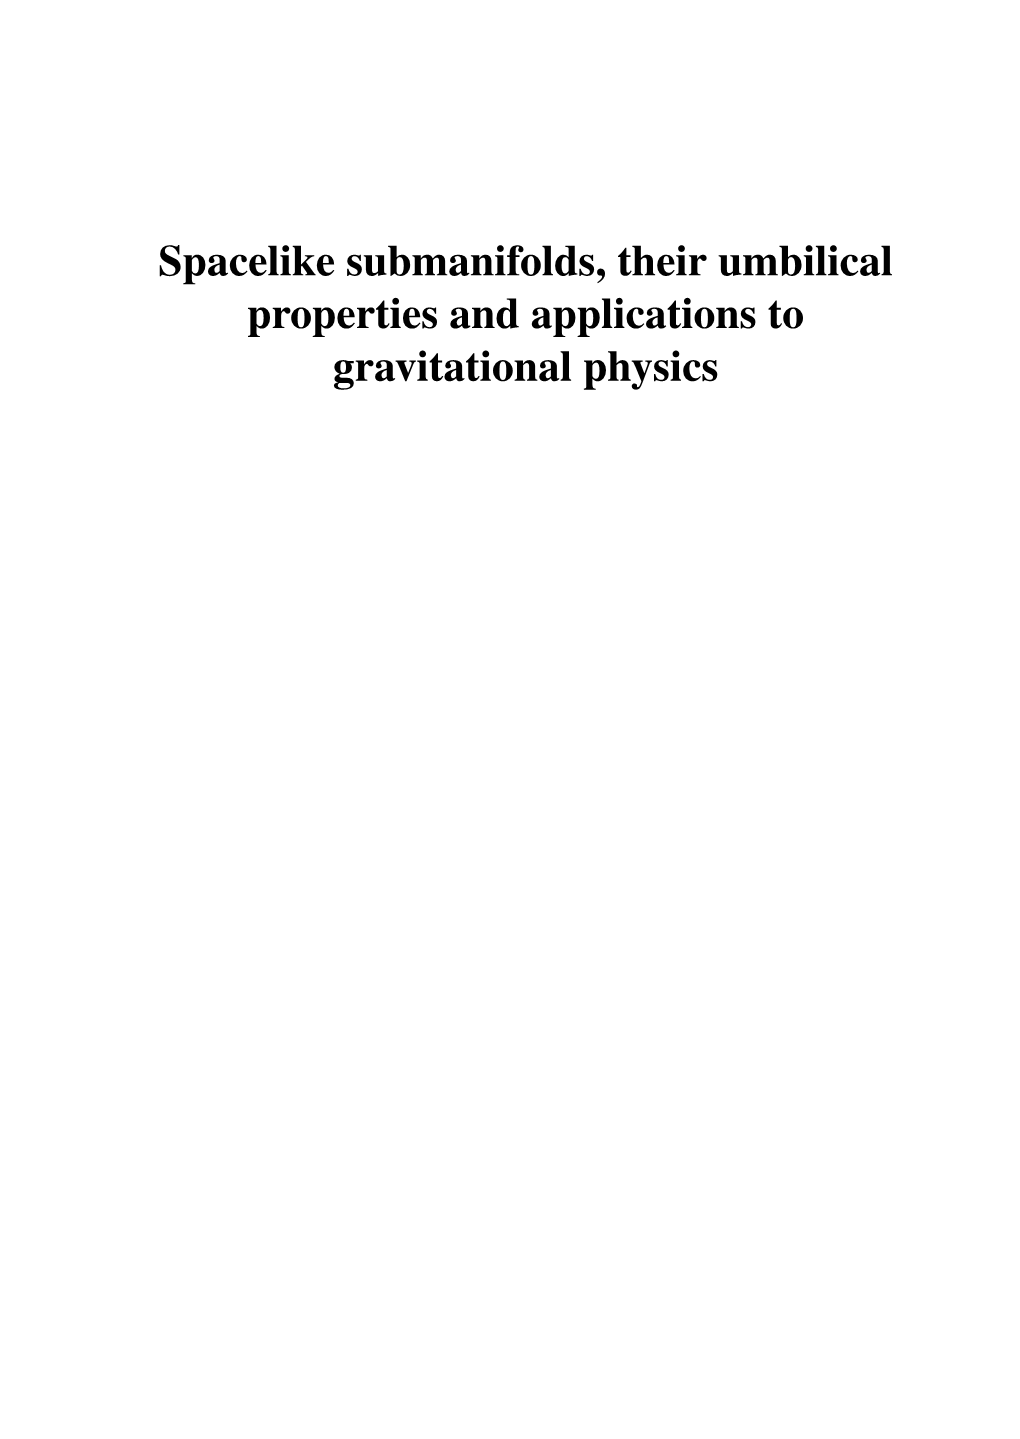 Spacelike Submanifolds, Their Umbilical Properties and Applications to Gravitational Physics